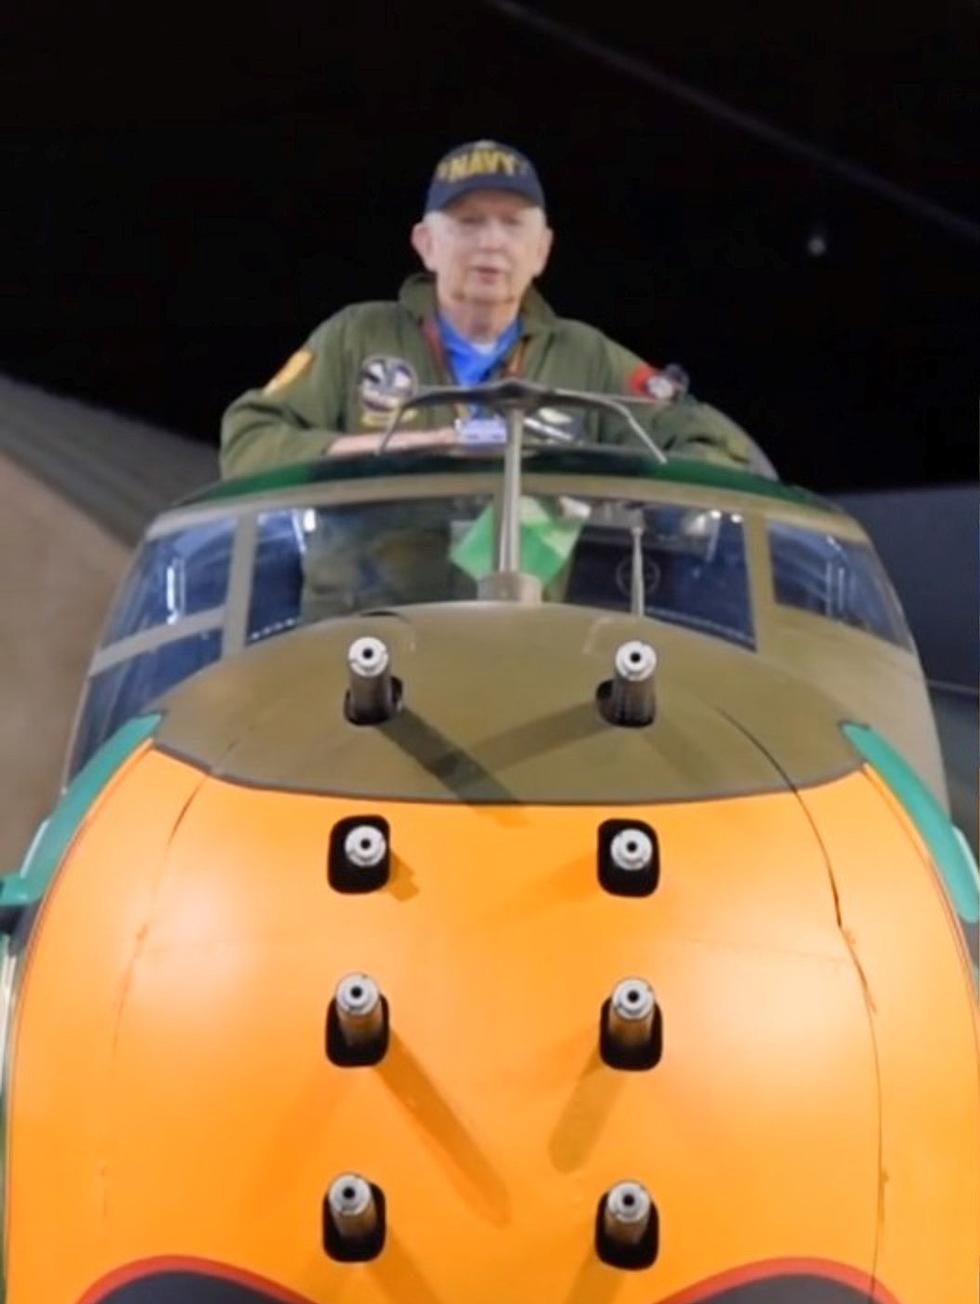 Kalamazoo Air Zoo Doesn't Want You Making Out in Their Planes